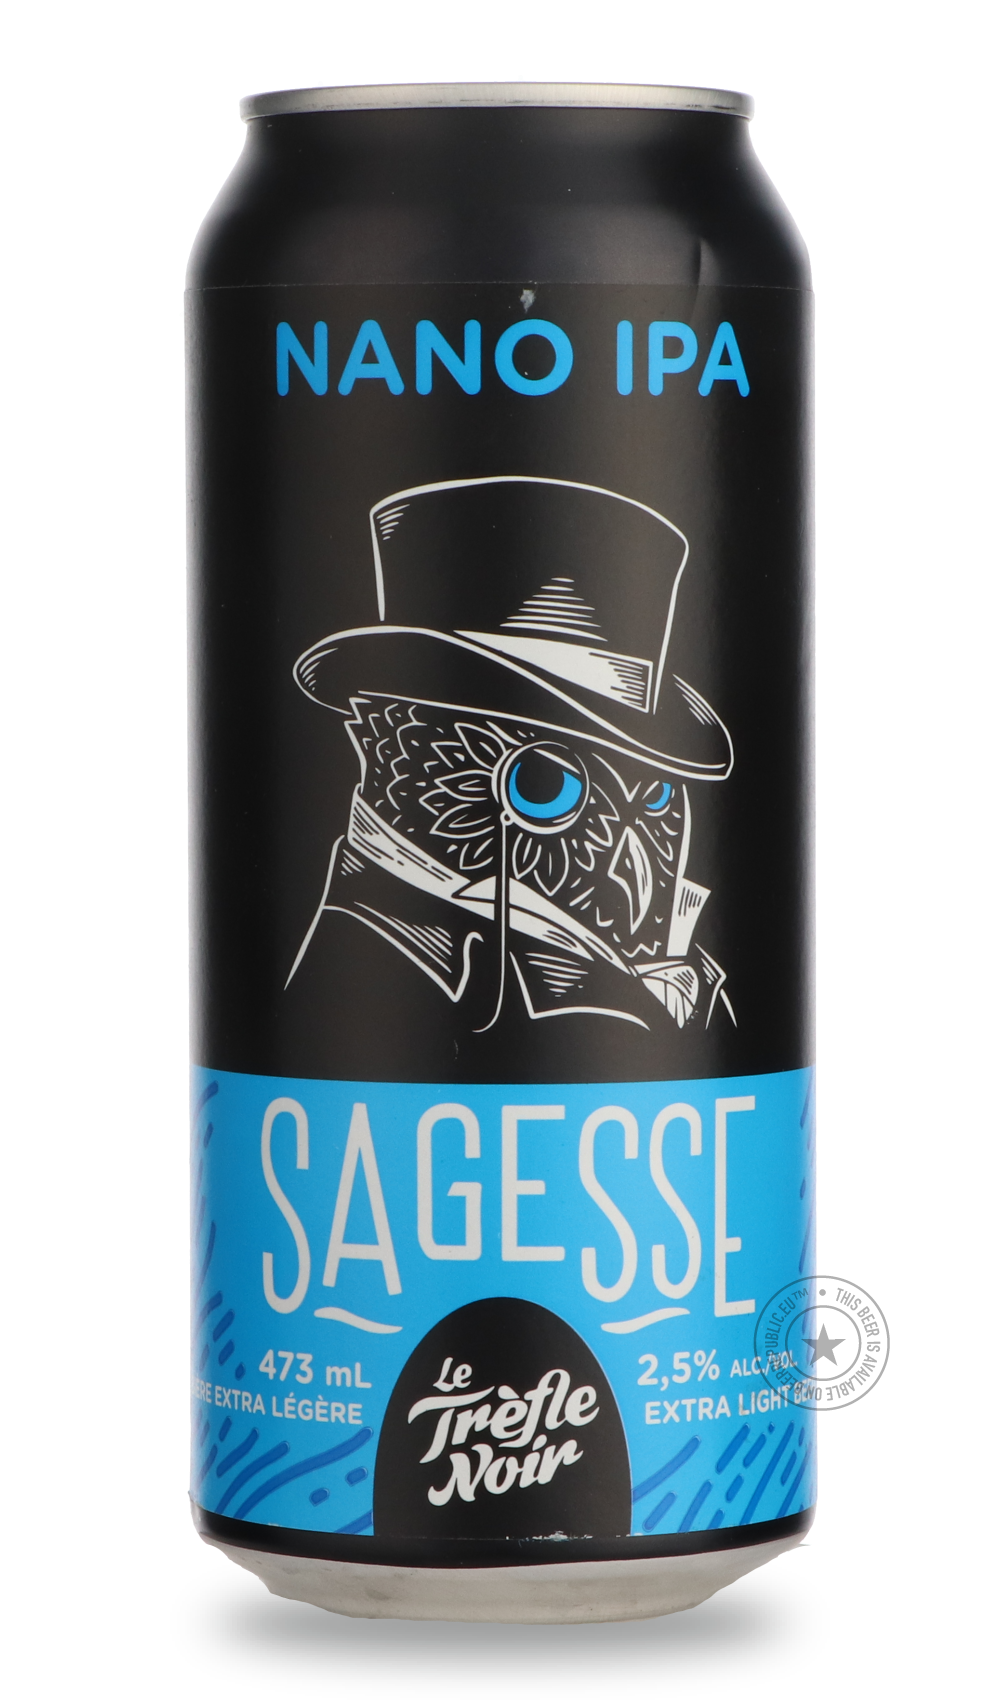 -Le Tréfle Noir- Sagesse 2,5%-IPA- Only @ Beer Republic - The best online beer store for American & Canadian craft beer - Buy beer online from the USA and Canada - Bier online kopen - Amerikaans bier kopen - Craft beer store - Craft beer kopen - Amerikanisch bier kaufen - Bier online kaufen - Acheter biere online - IPA - Stout - Porter - New England IPA - Hazy IPA - Imperial Stout - Barrel Aged - Barrel Aged Imperial Stout - Brown - Dark beer - Blond - Blonde - Pilsner - Lager - Wheat - Weizen - Amber - Bar